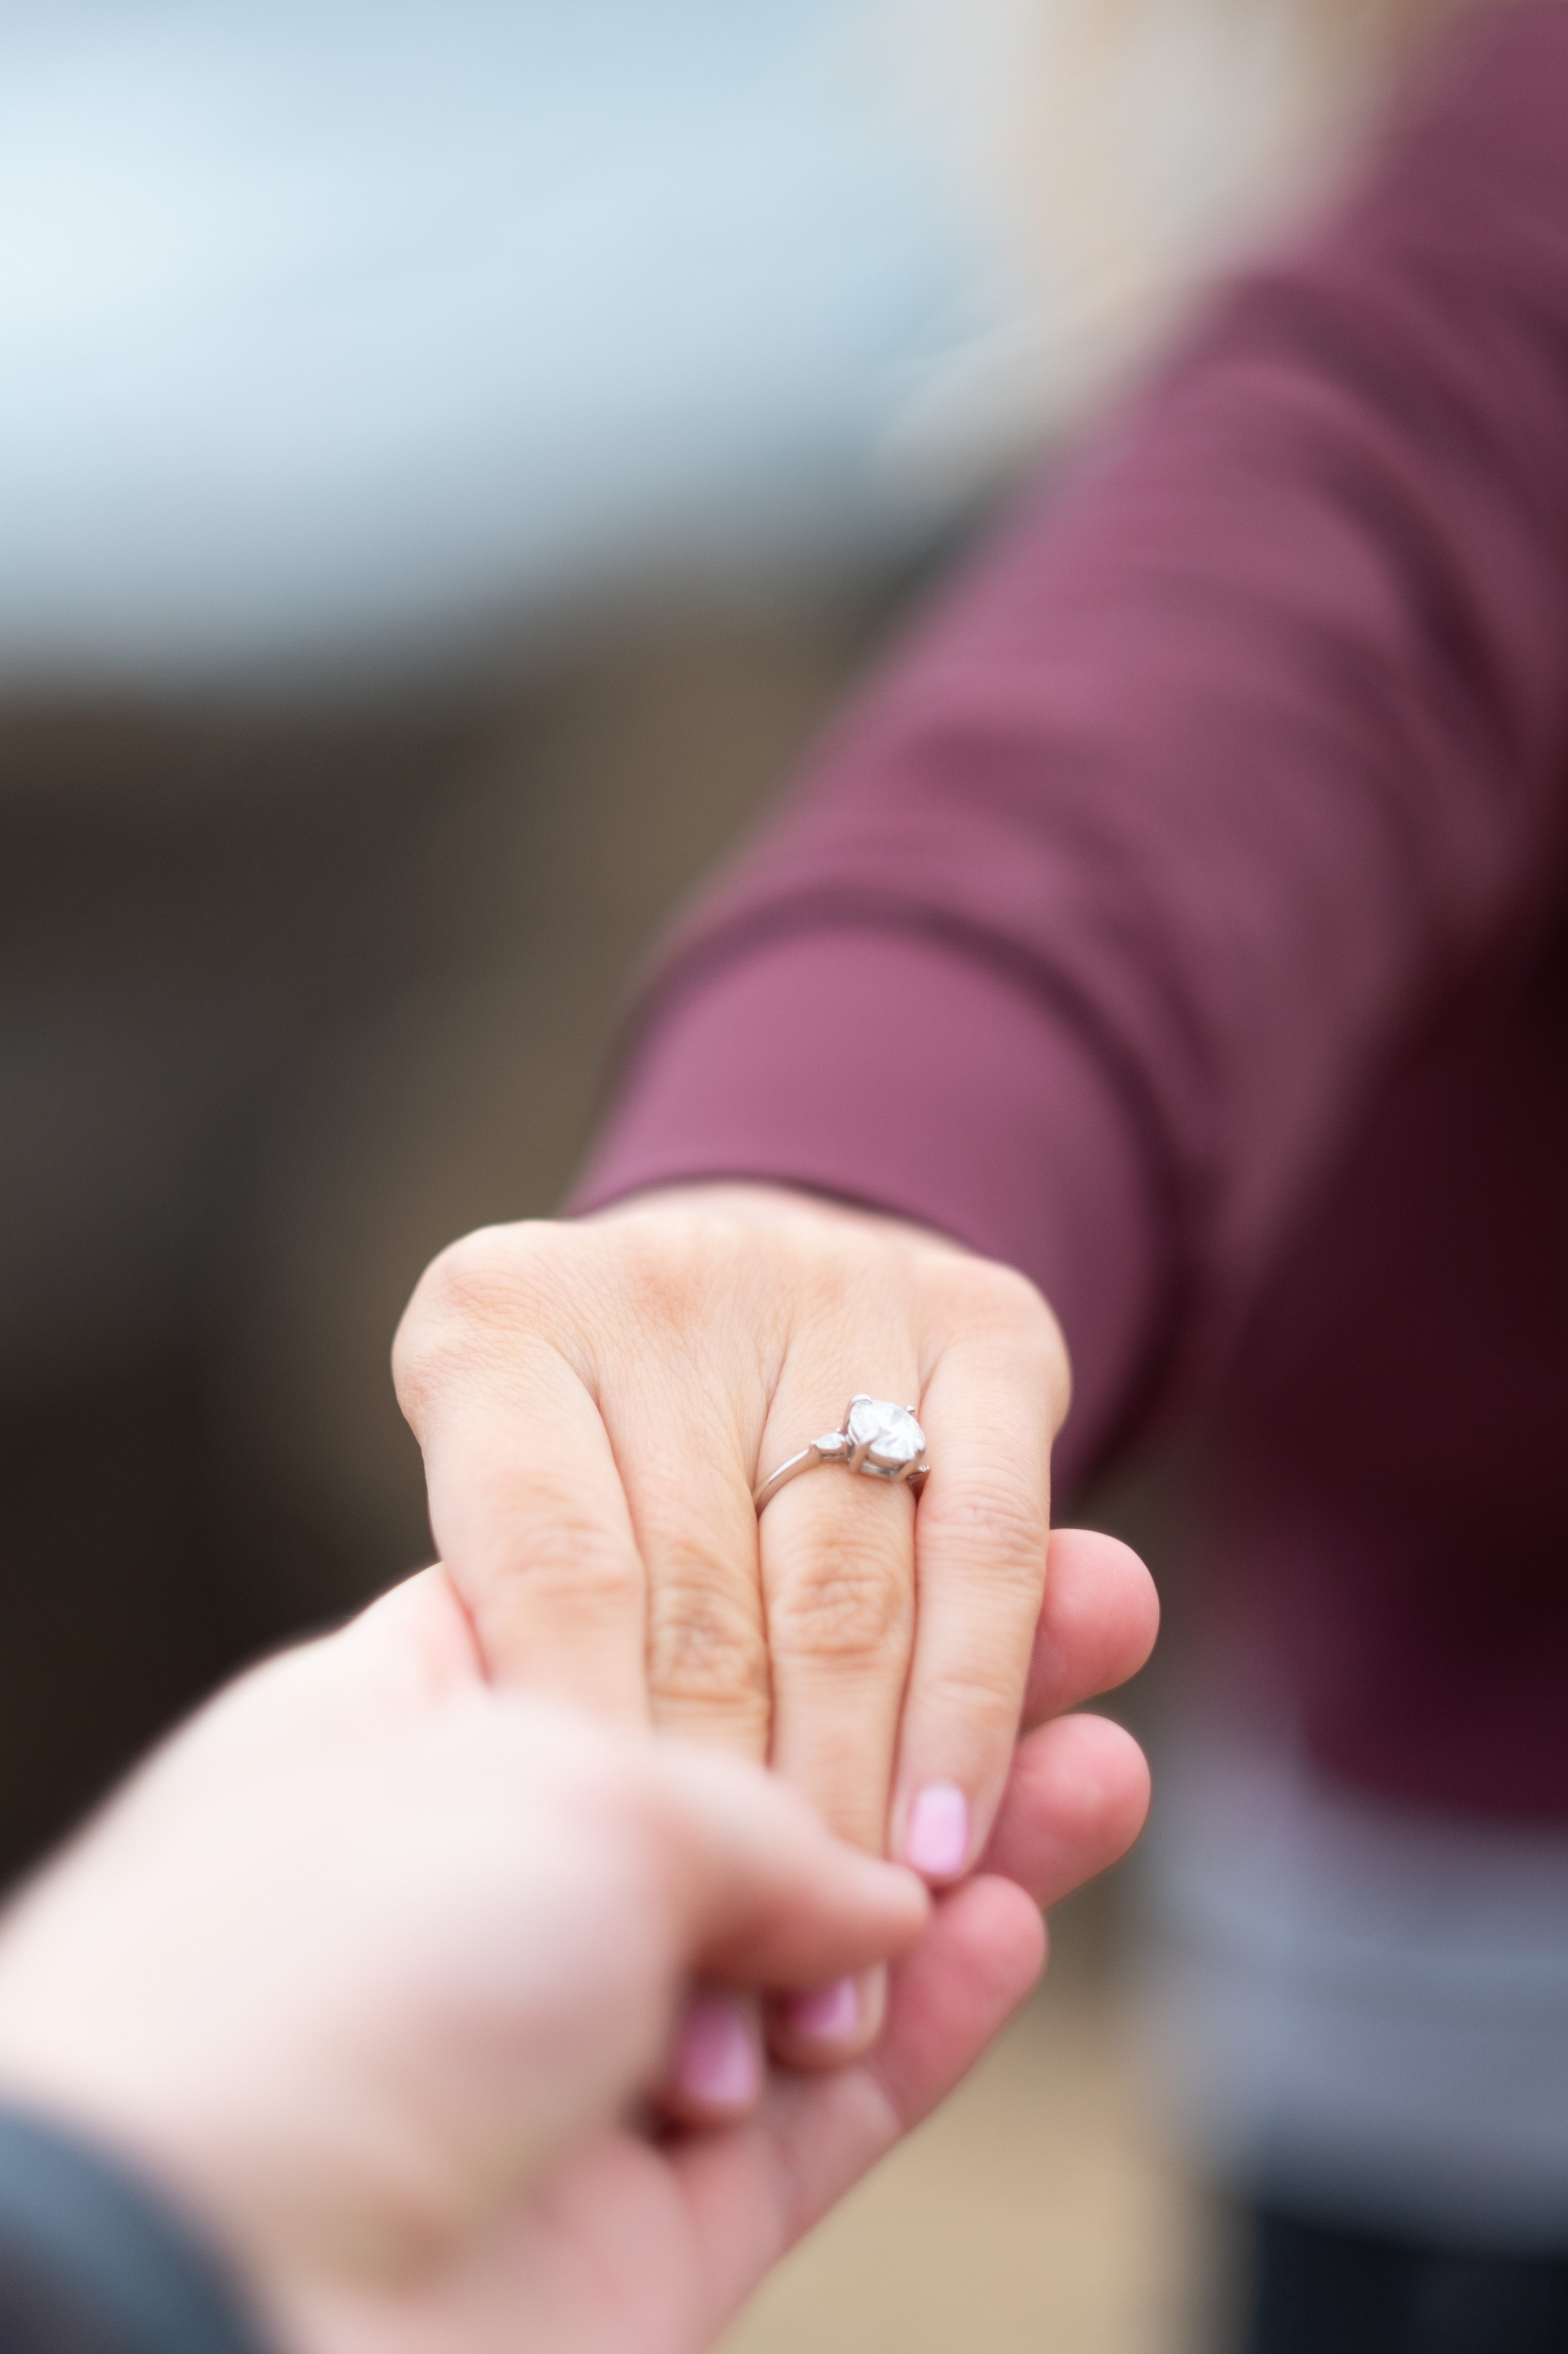 Two hands with one wearing an engagement ring - Stock Image - F033/9094 -  Science Photo Library